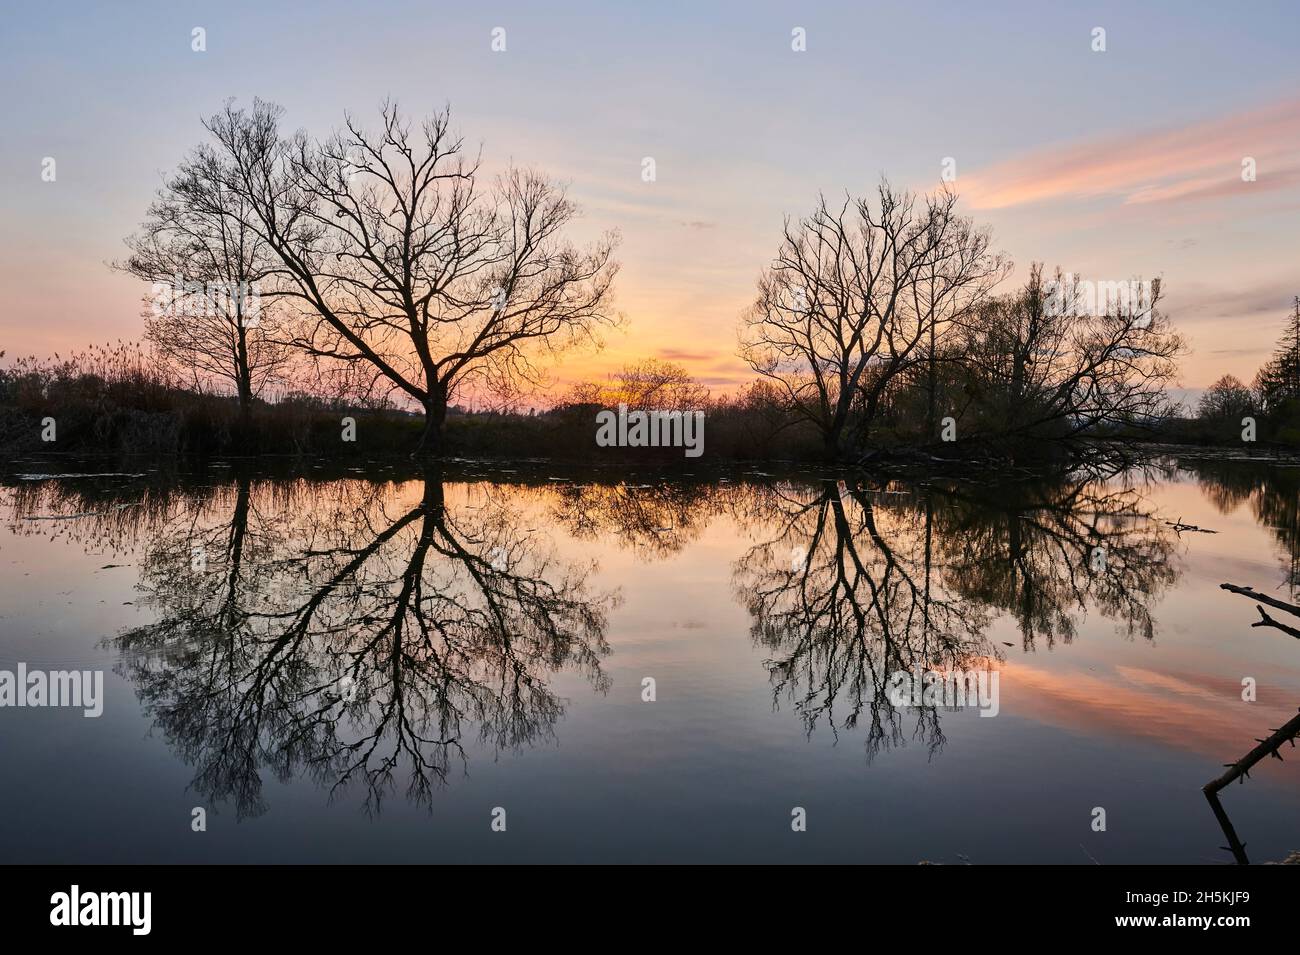 Leafless Crack willow or brittle willow (Salix x fragilis) trees beside a lake at sunset with a mirror image reflected in the water; Bavaria, Germany Stock Photo